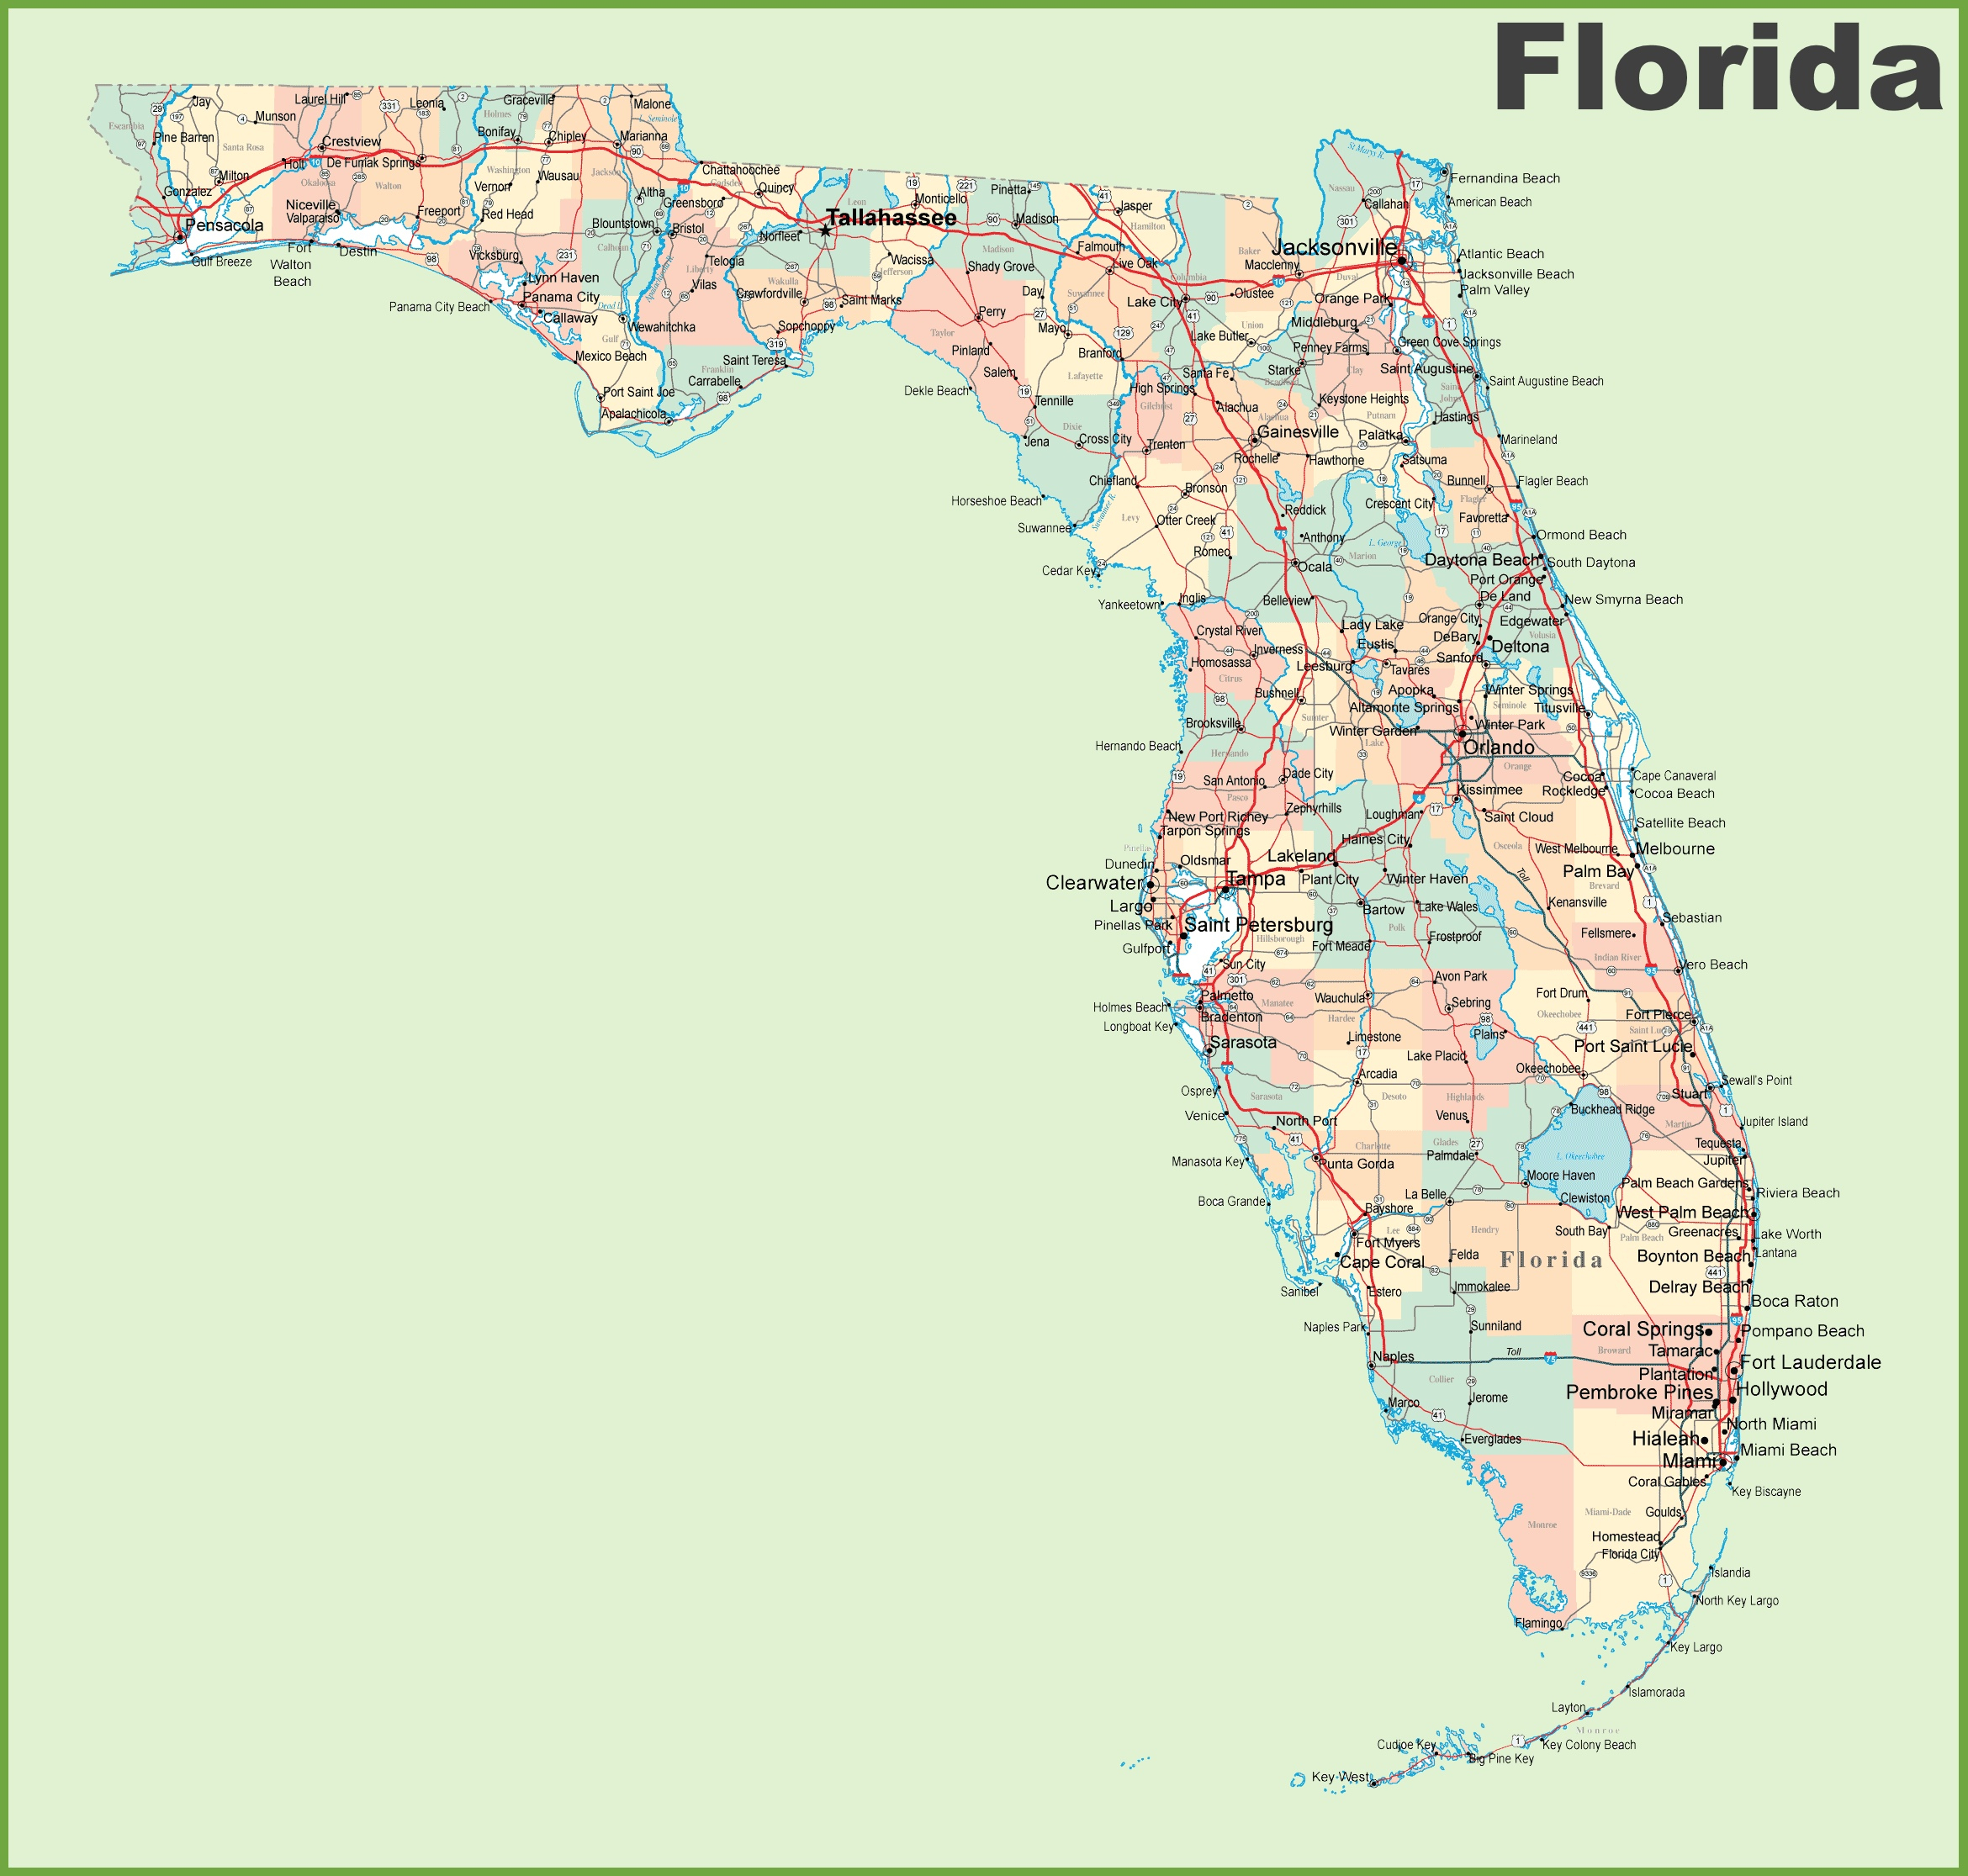 Florida Road Map With Cities And Towns - Road Map Of South Florida